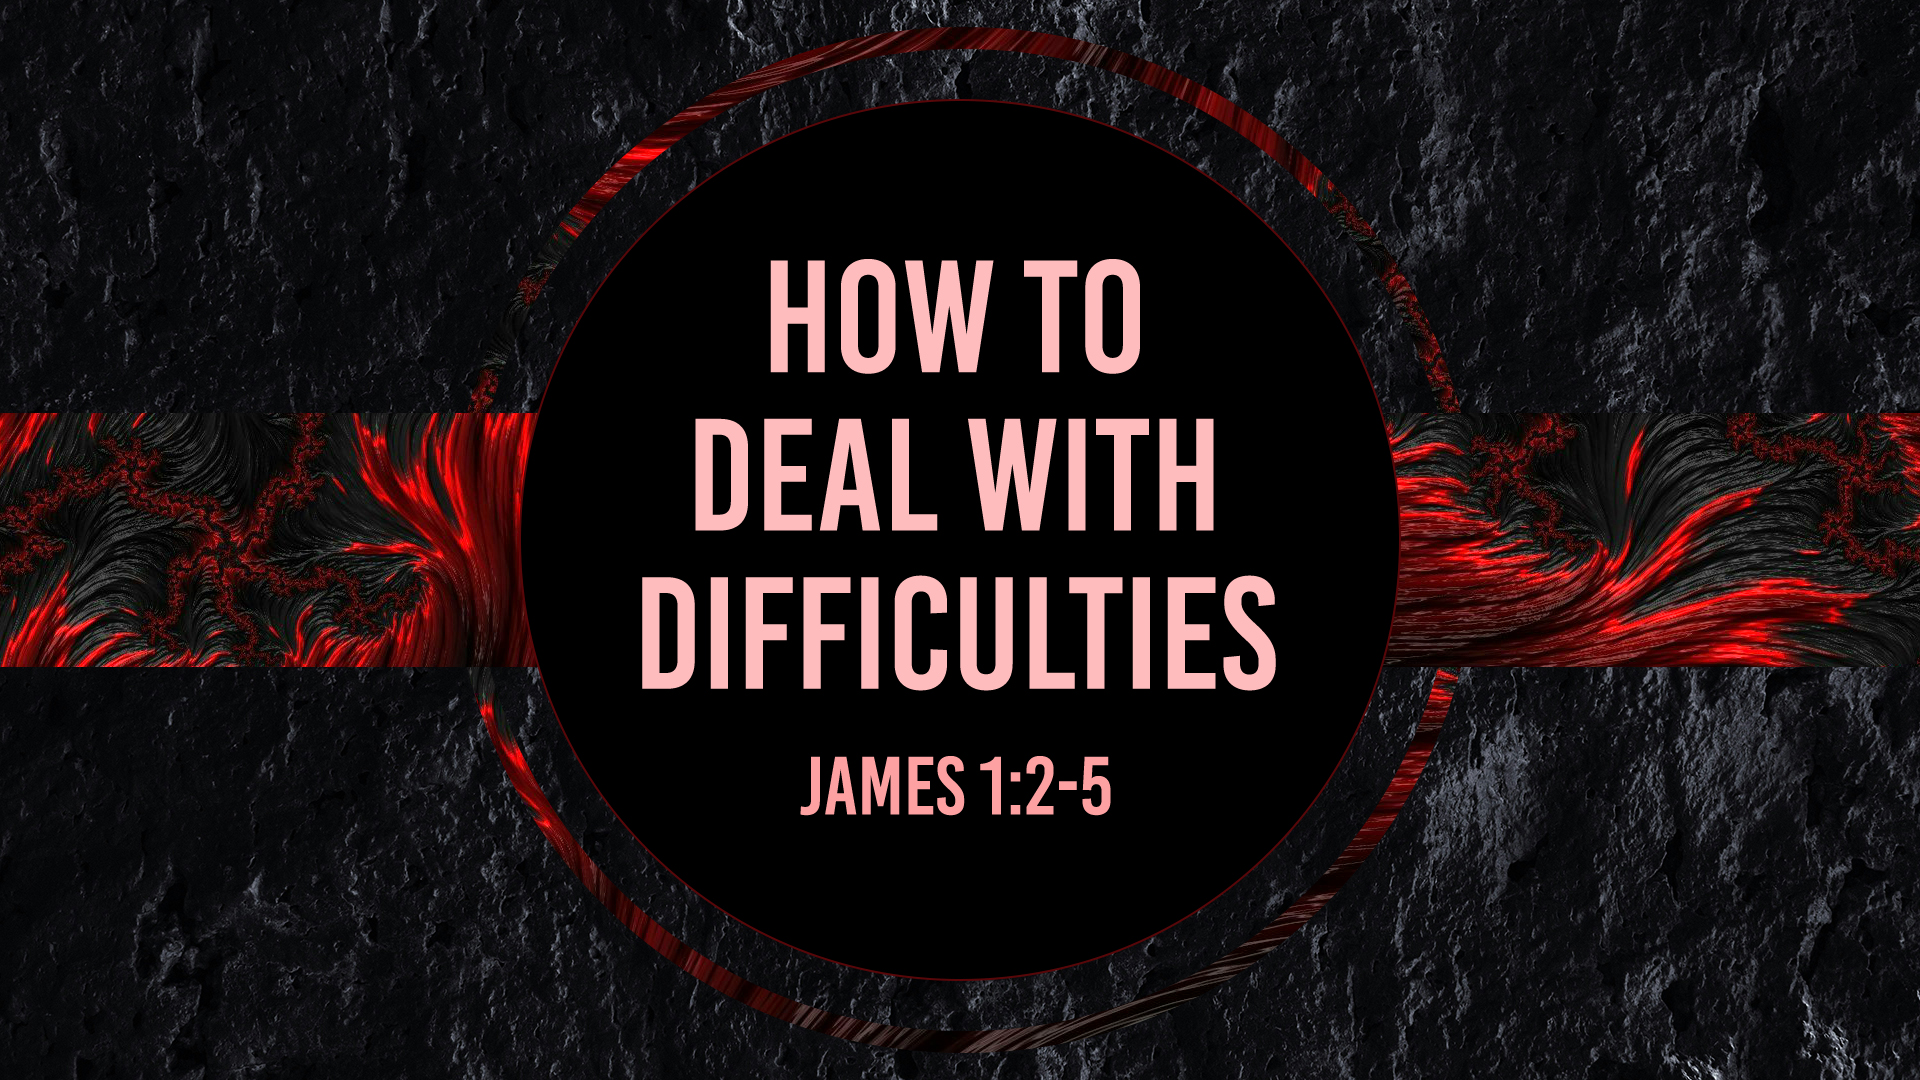 How to Deal with Difficulties